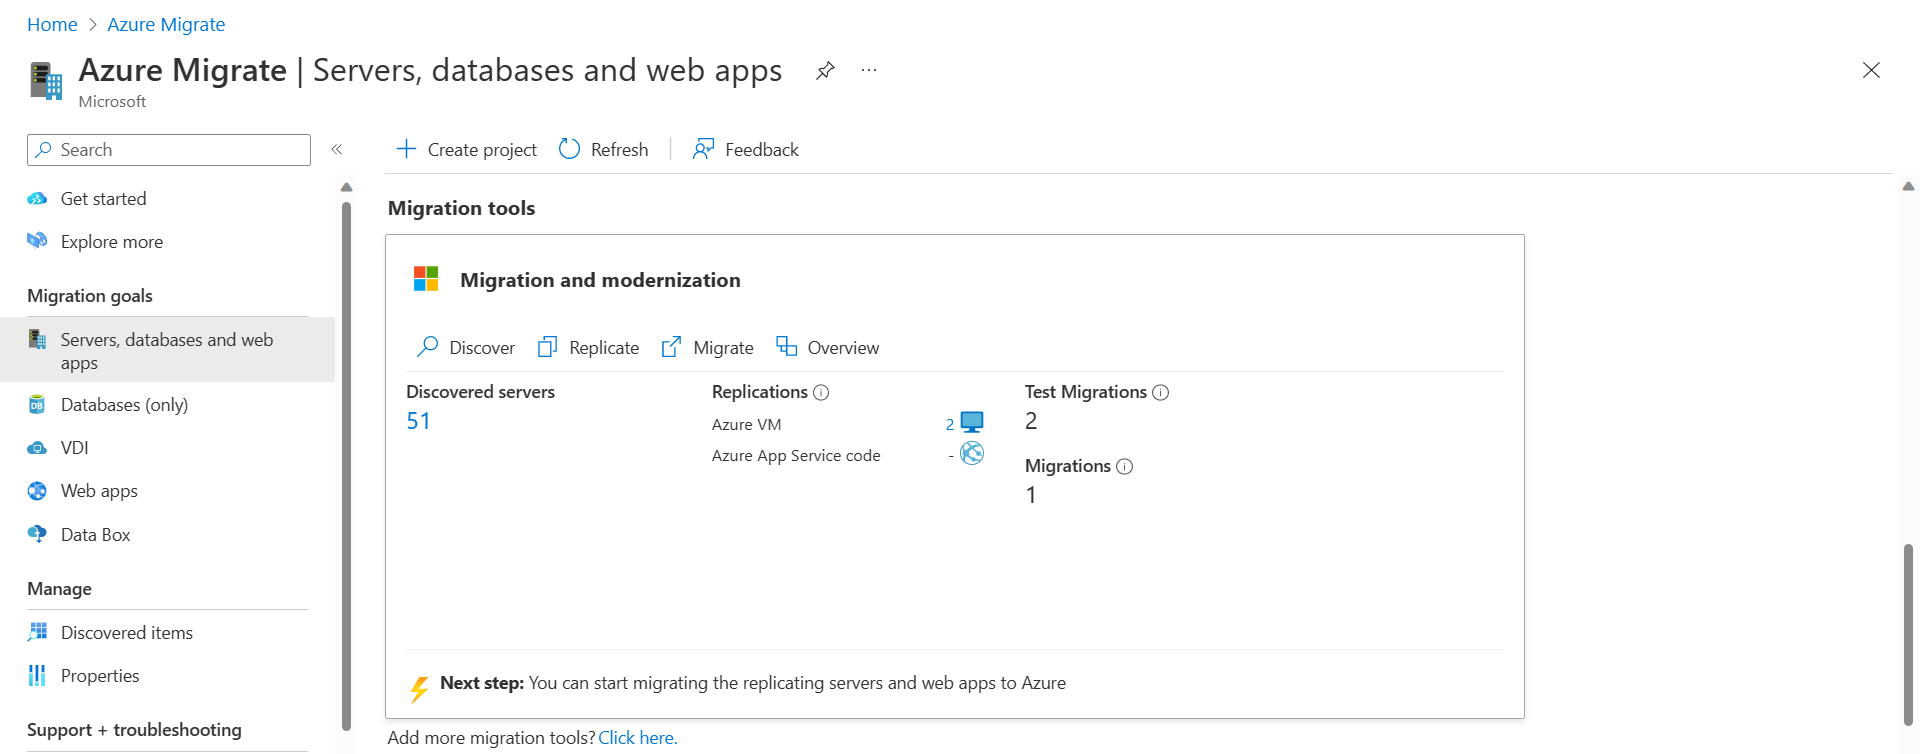 Screenshot of the Azure Migrate Servers page in Azure Admin center.